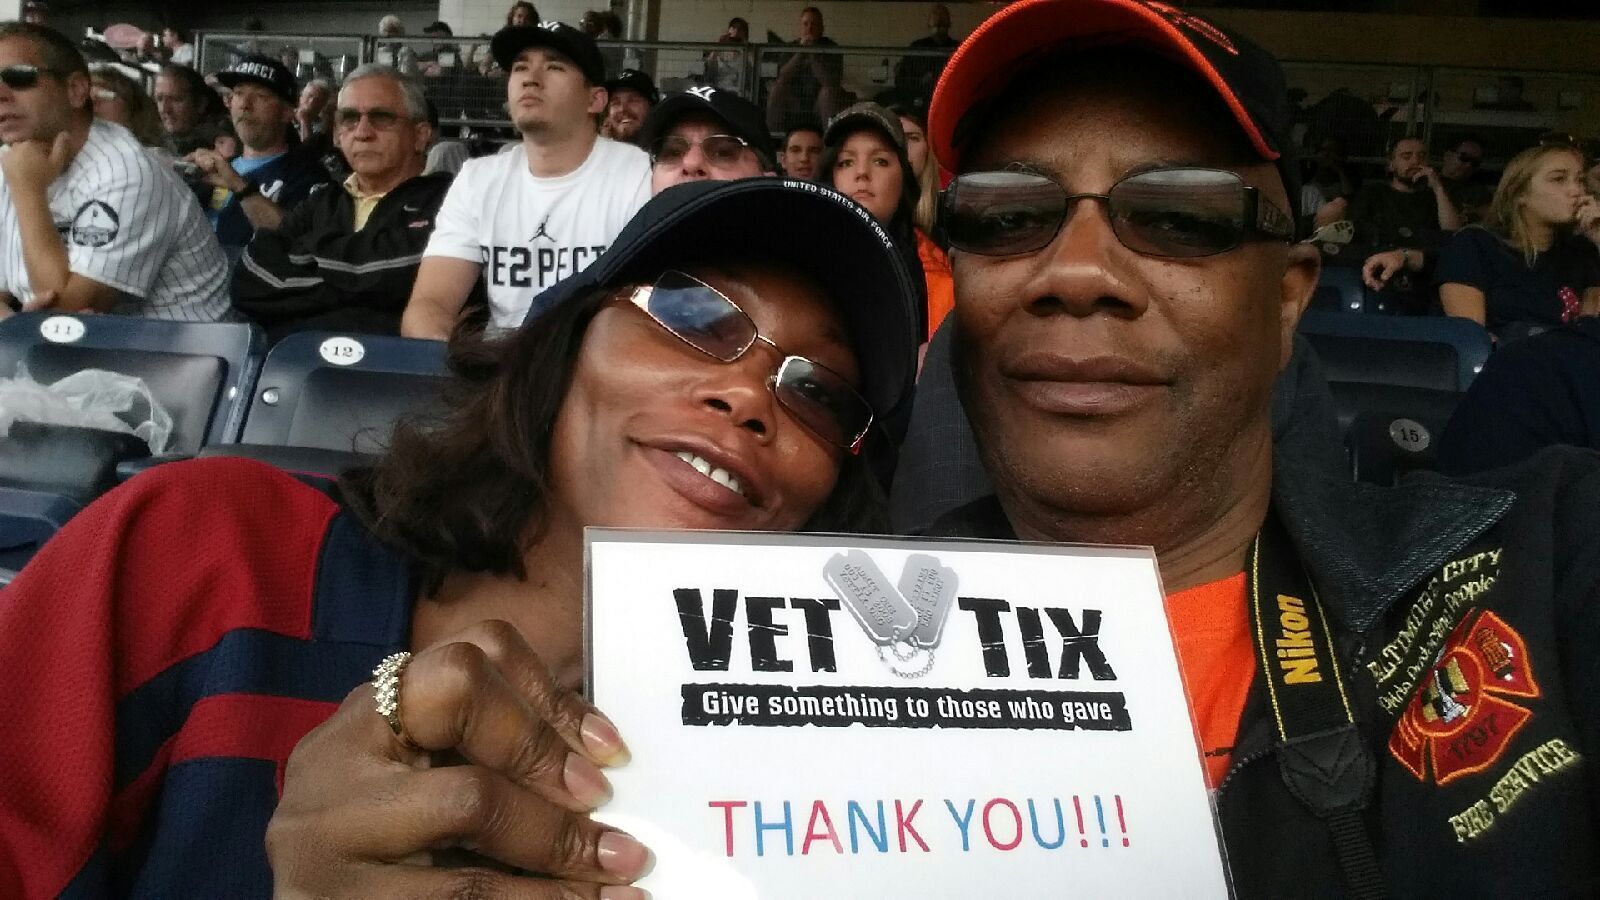 Thank you to United States Air Force - New York Yankees